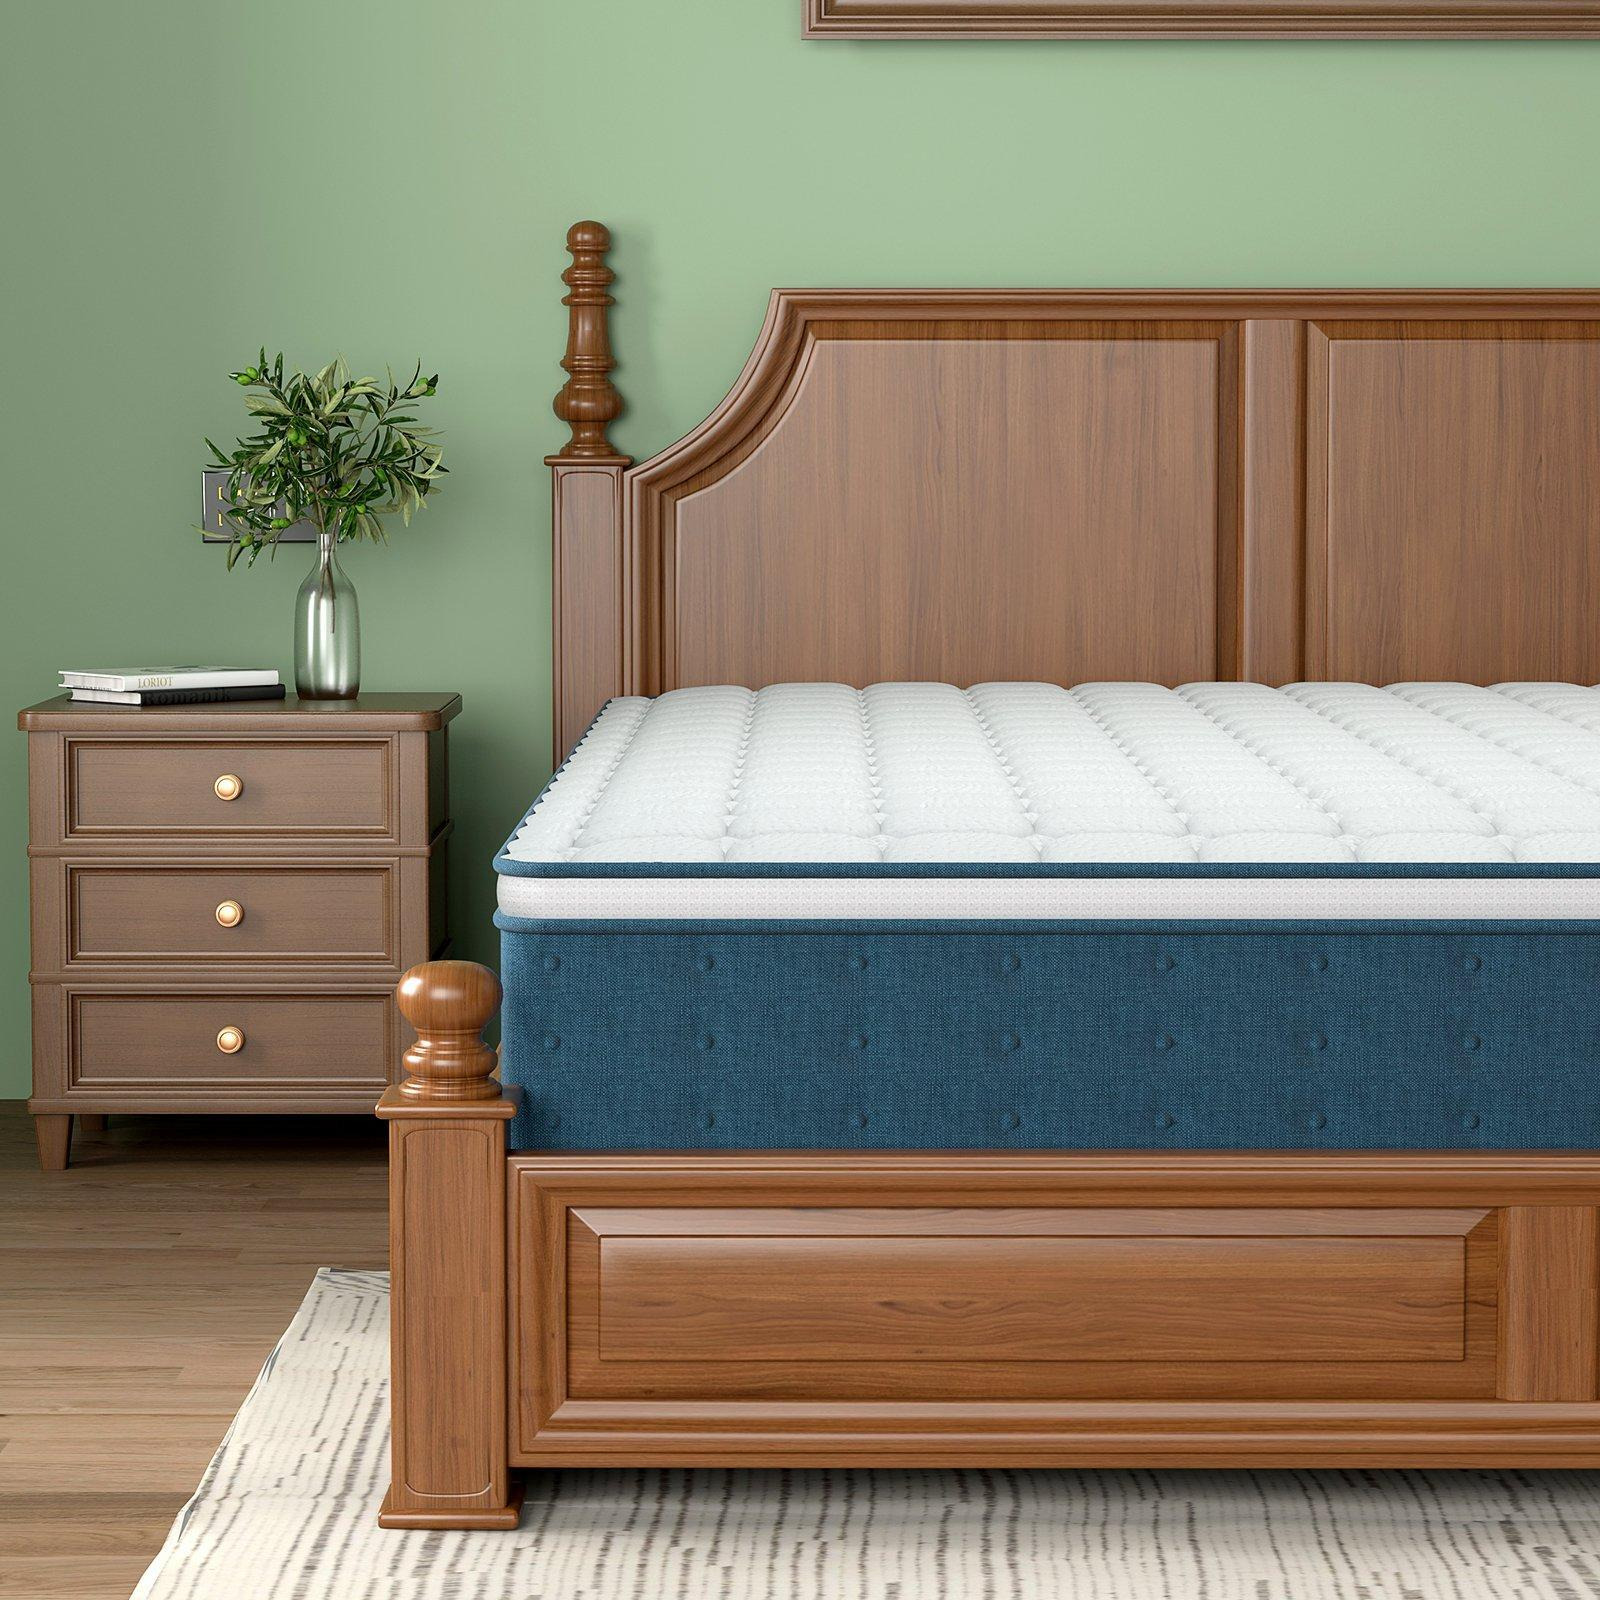 Zero Pressure Memory Foam and Individually Wrapped Spring Hybrid Mattress - image 1